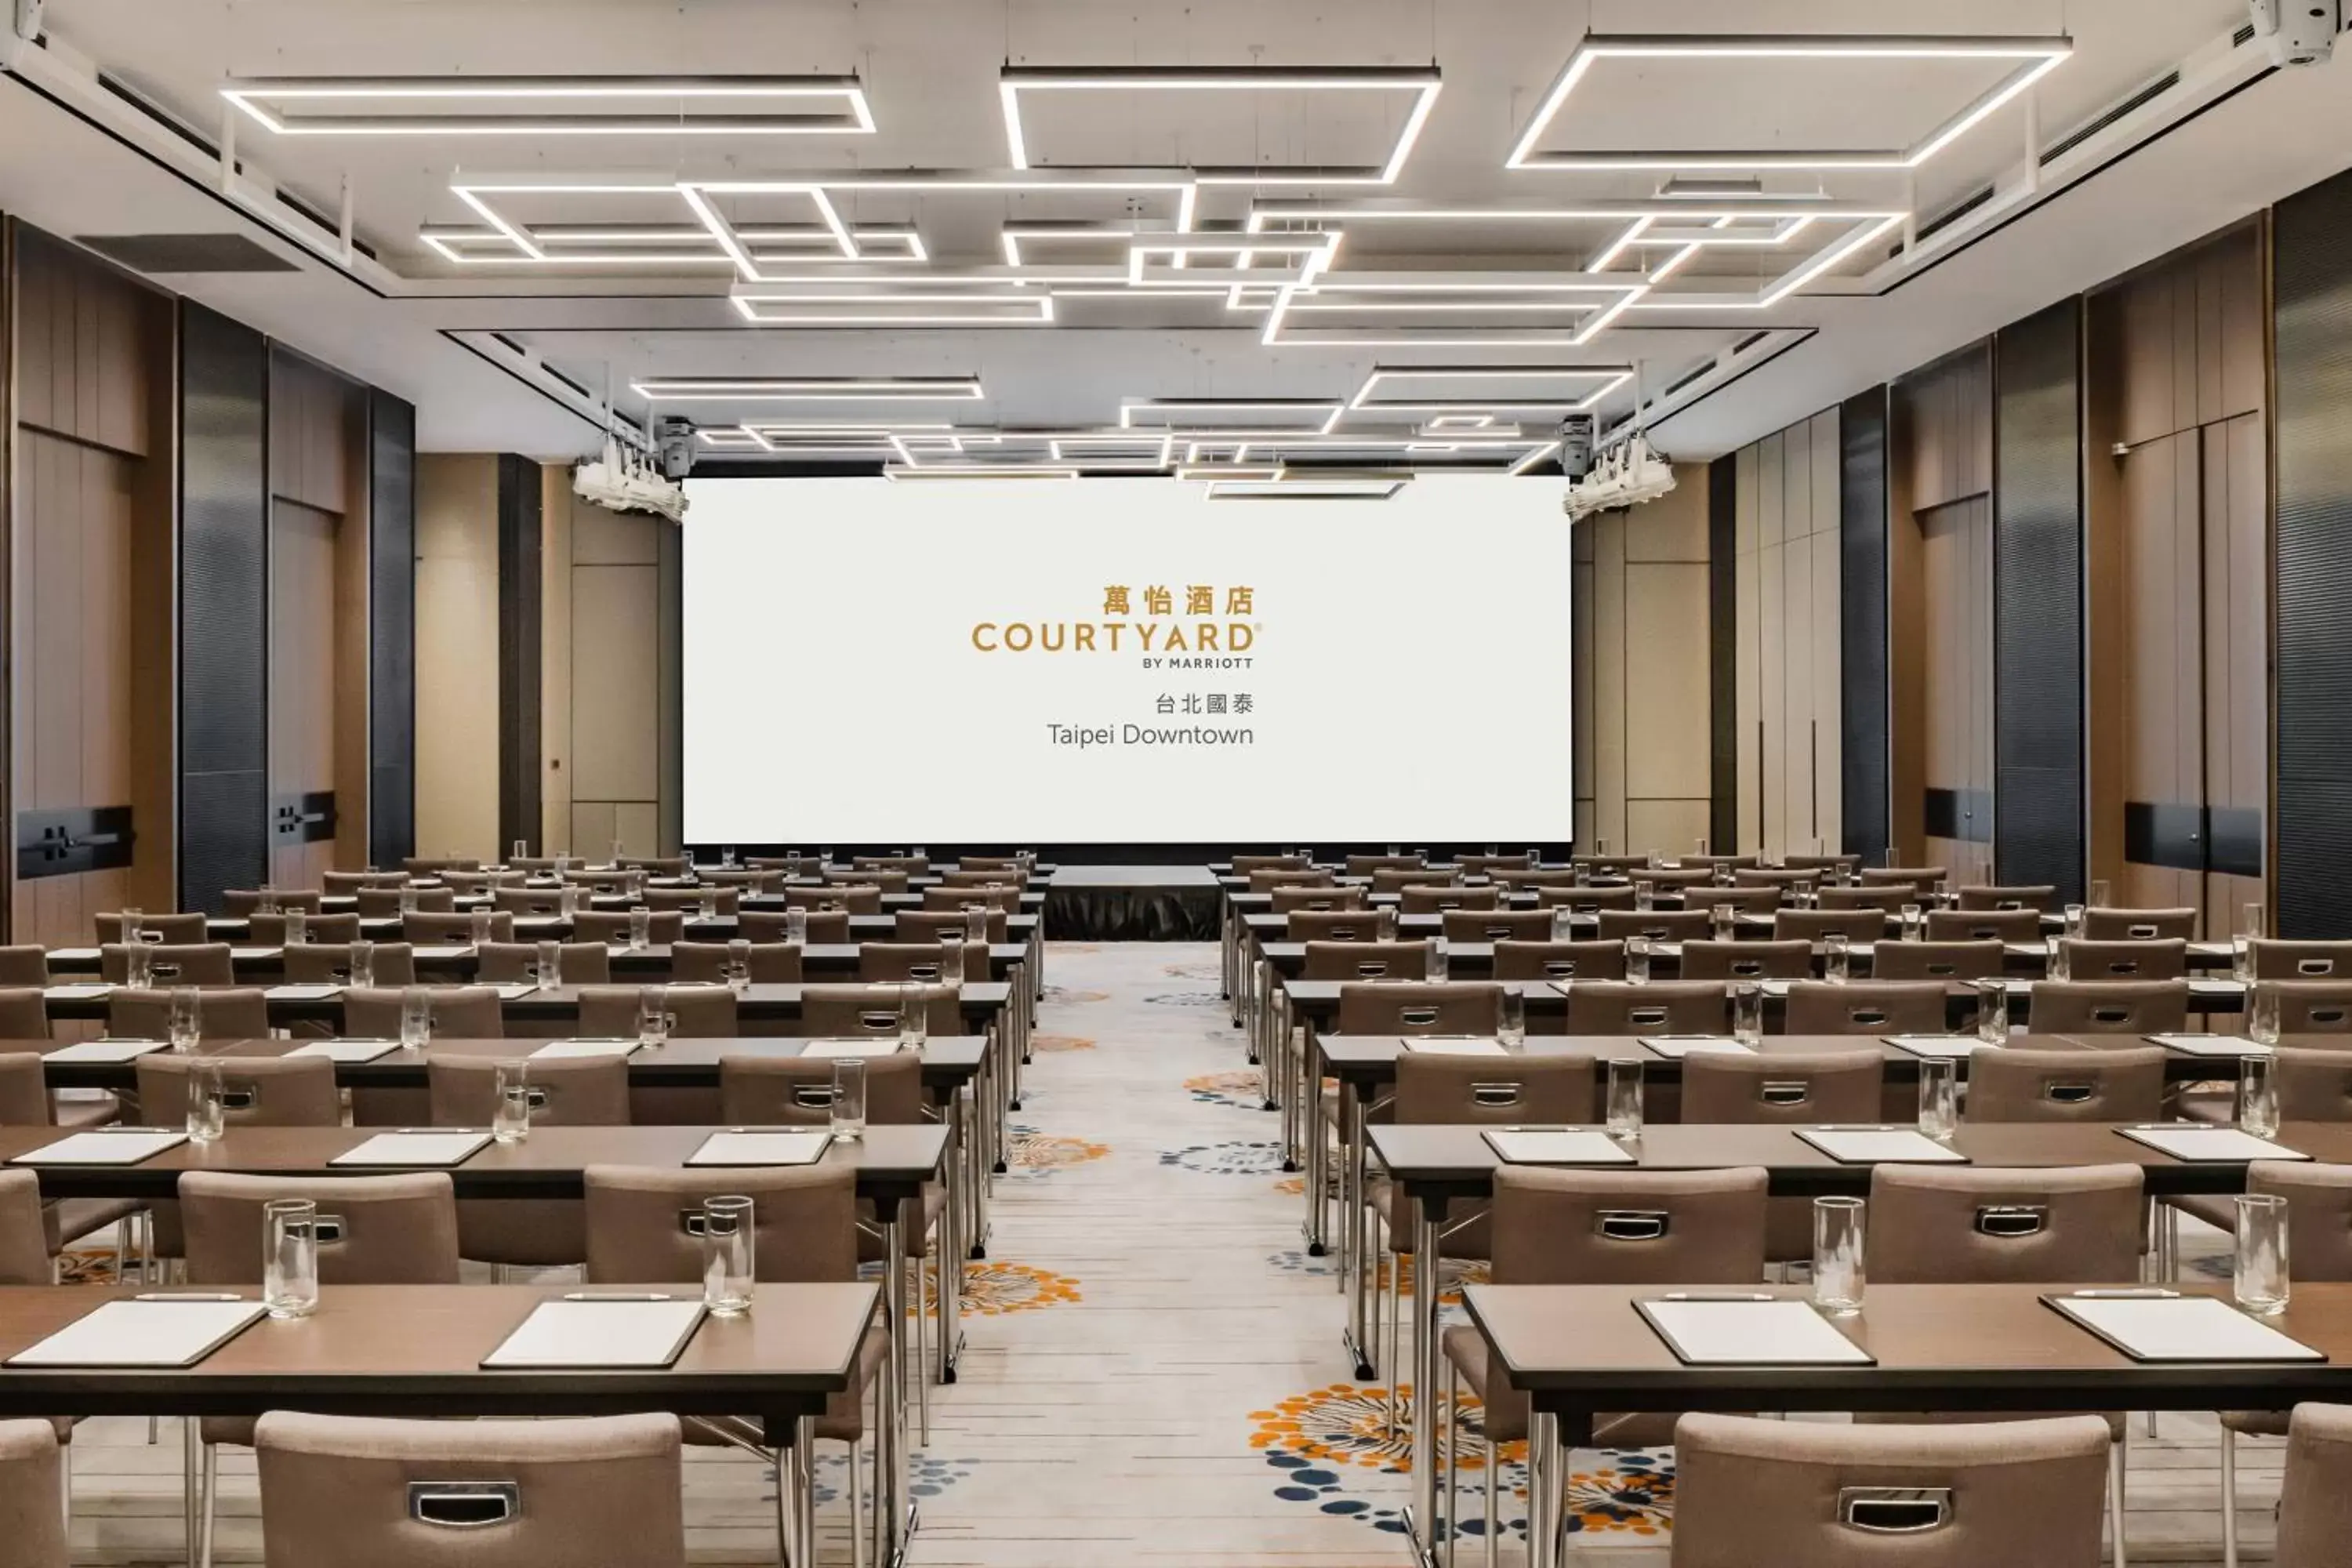 Meeting/conference room in Courtyard by Marriott Taipei Downtown